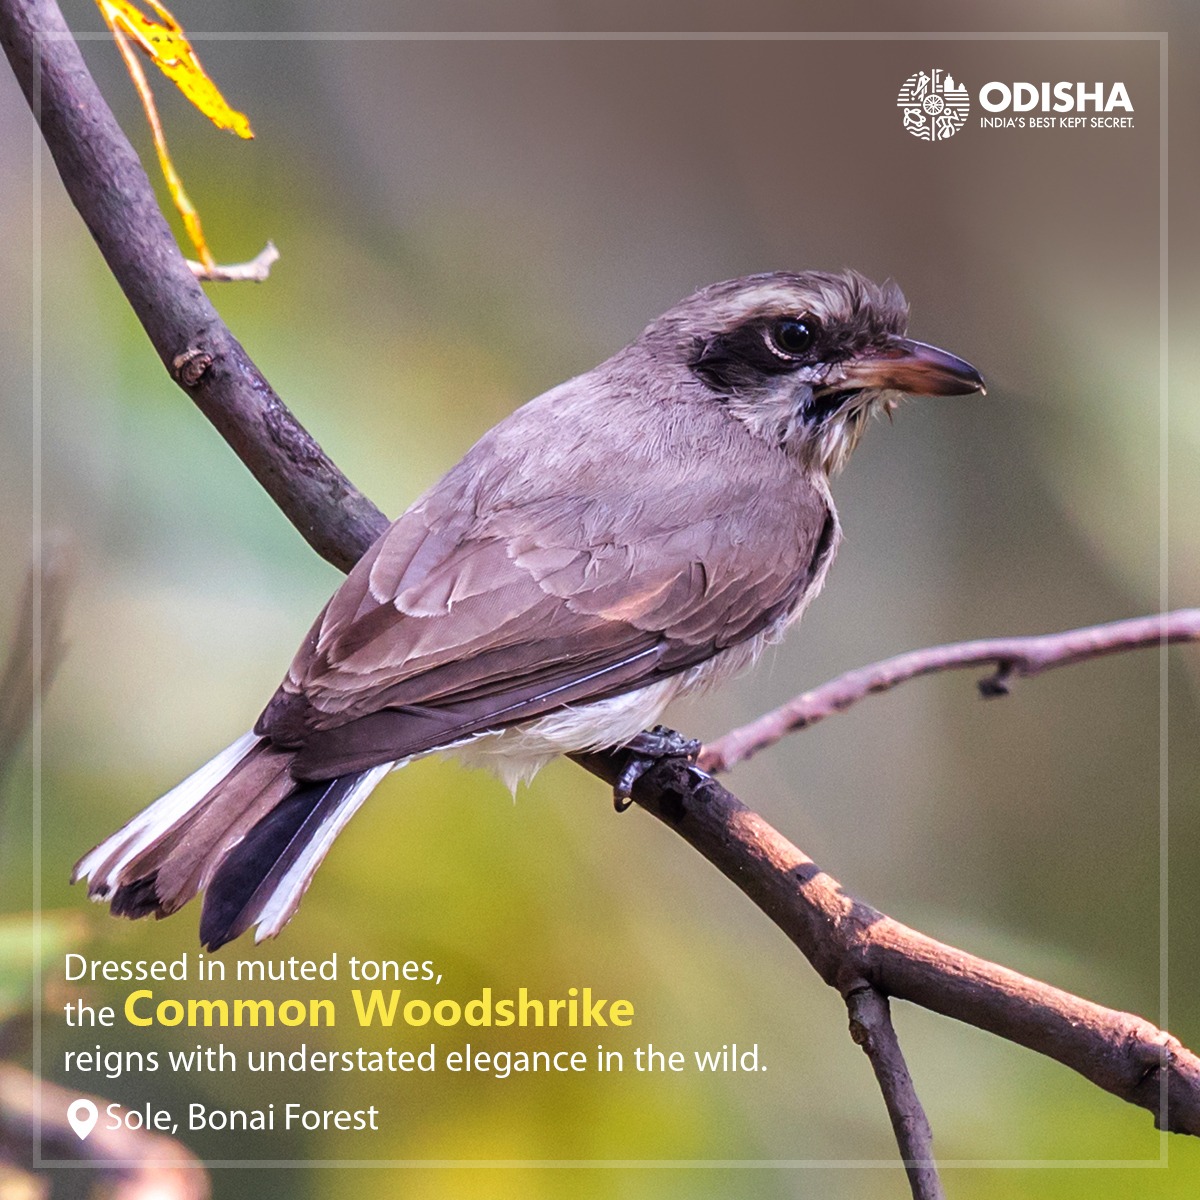 The Common Wood Shrike's understated elegance lights up the dry forested areas and shrubland.
Embrace the beauty of nature and embark on your own birdwatching adventure today. 

📸 @NaikSatyesh at Bonai Forest

#BirdsOfChilika #OdishaTourism